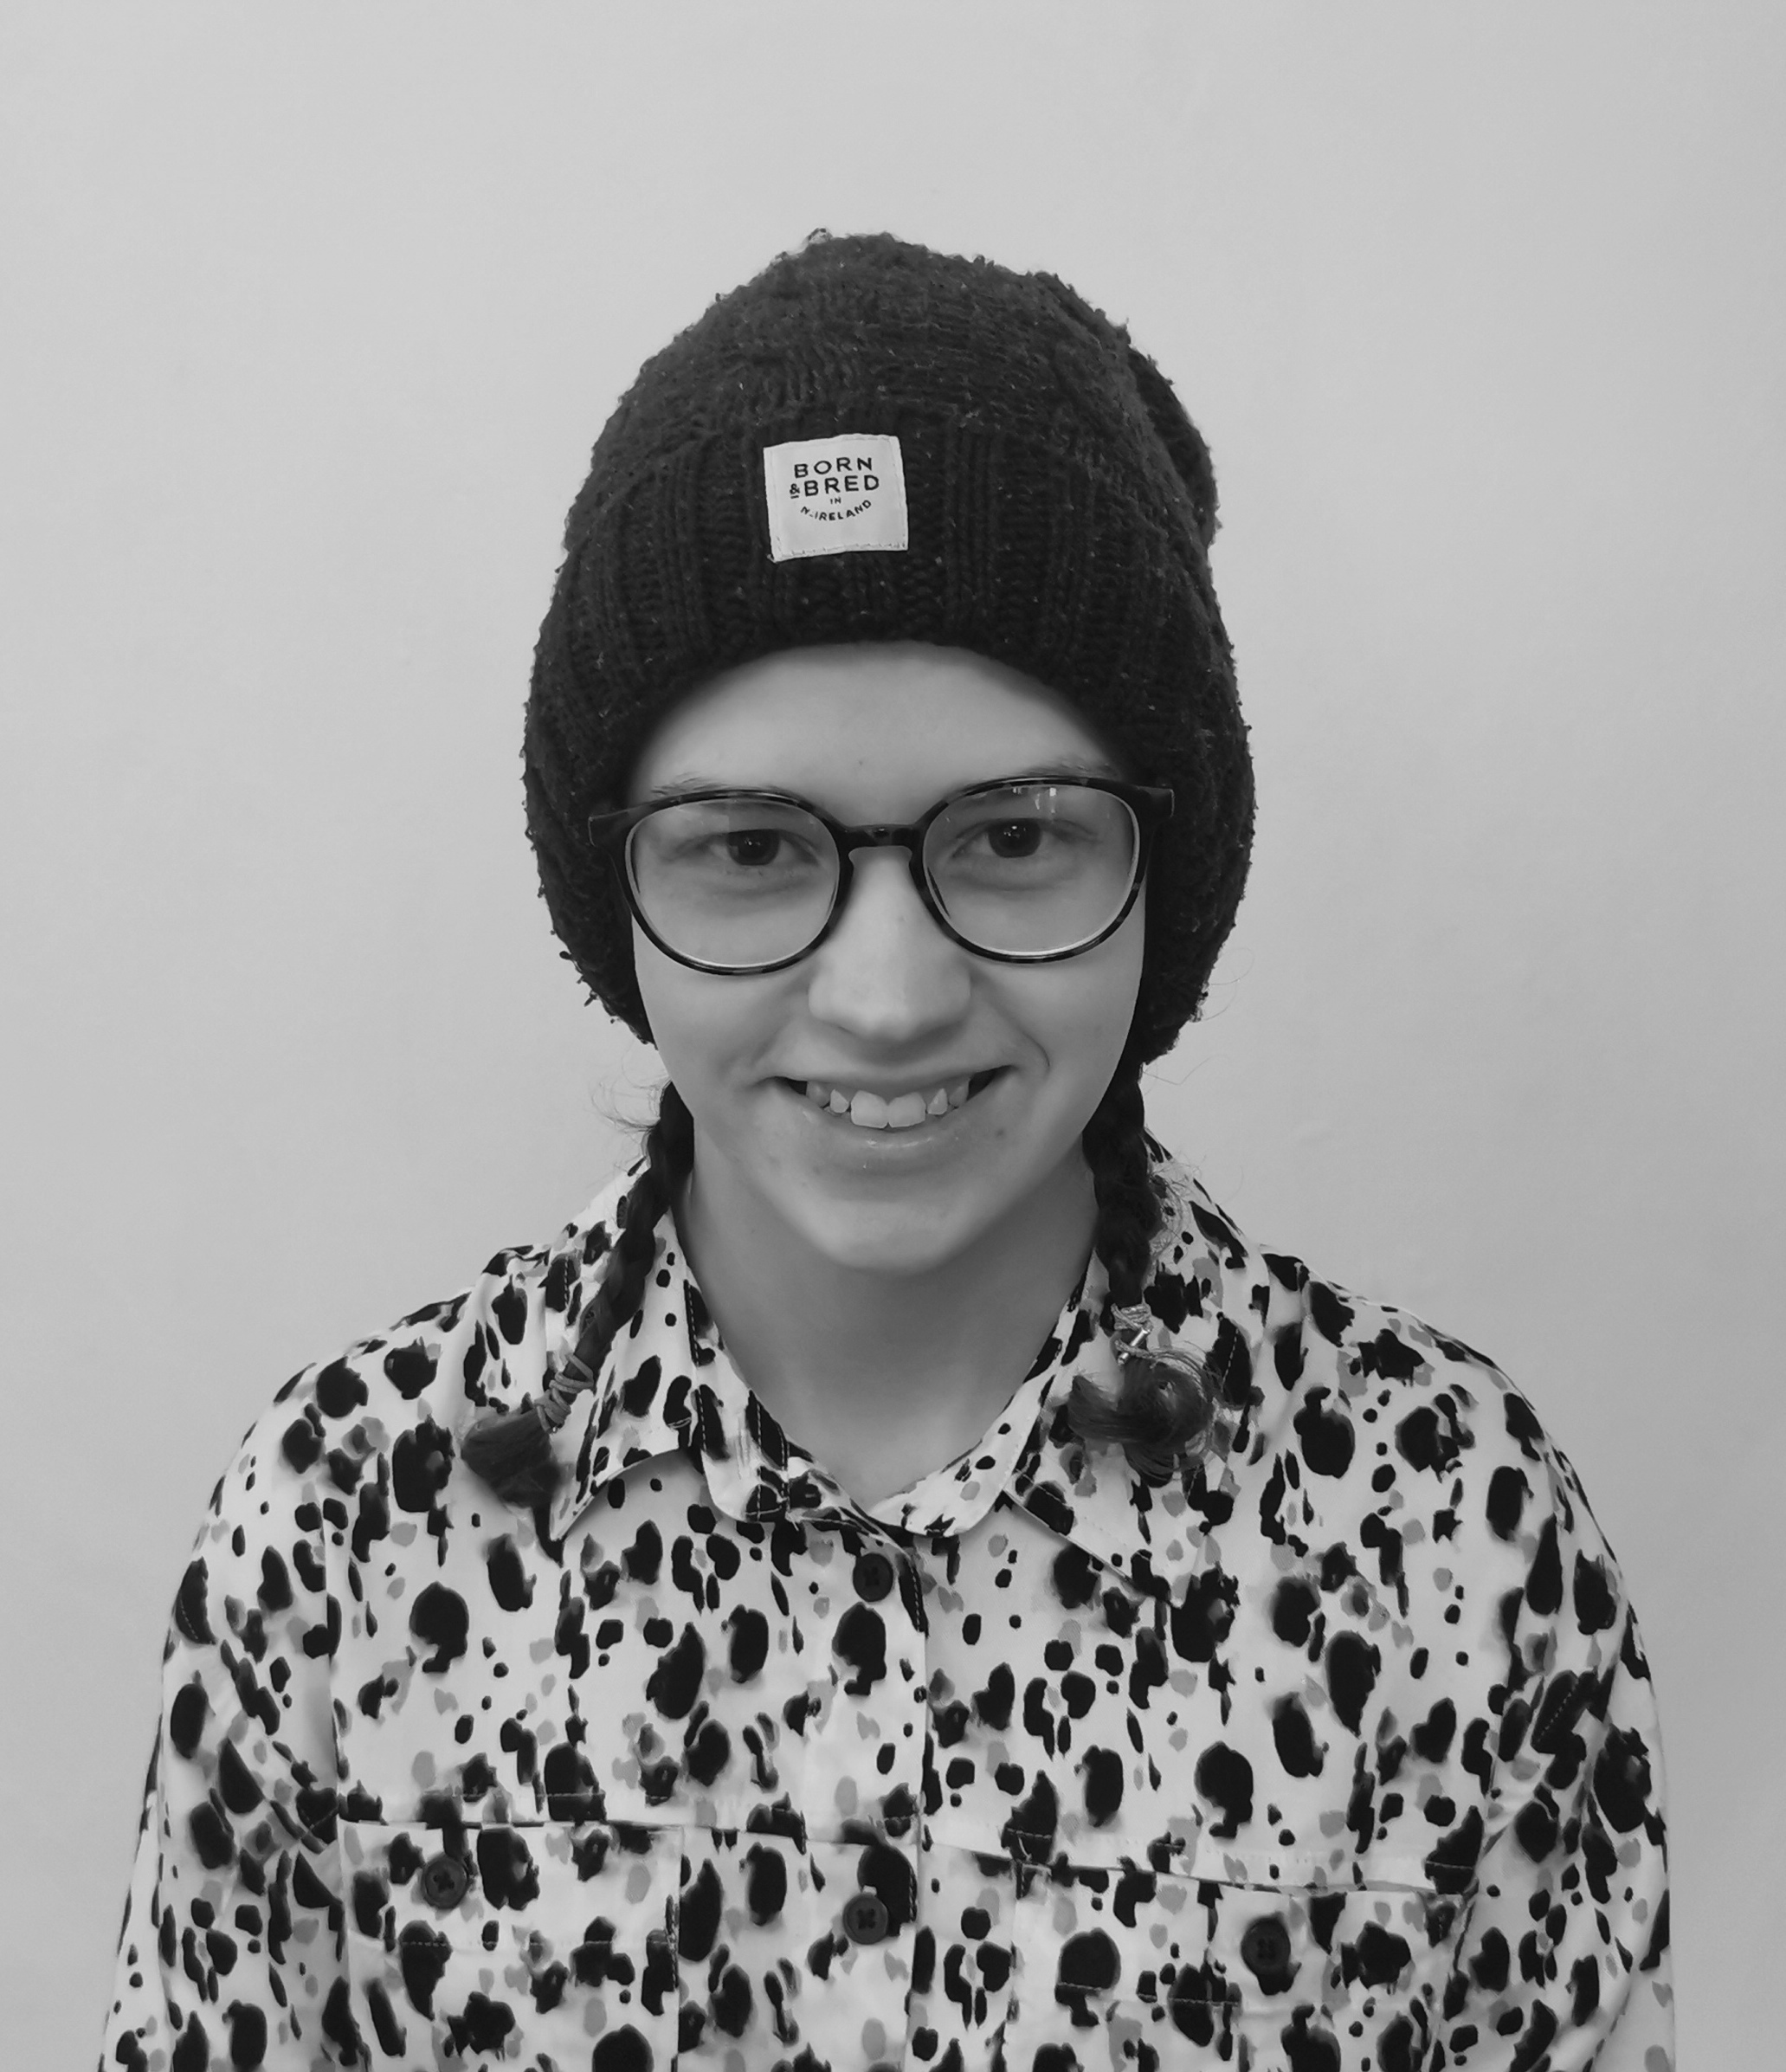 A black and white image of a person from the chest up, wearing a shirt. They have two plaits and are wearing a hat and glasses.